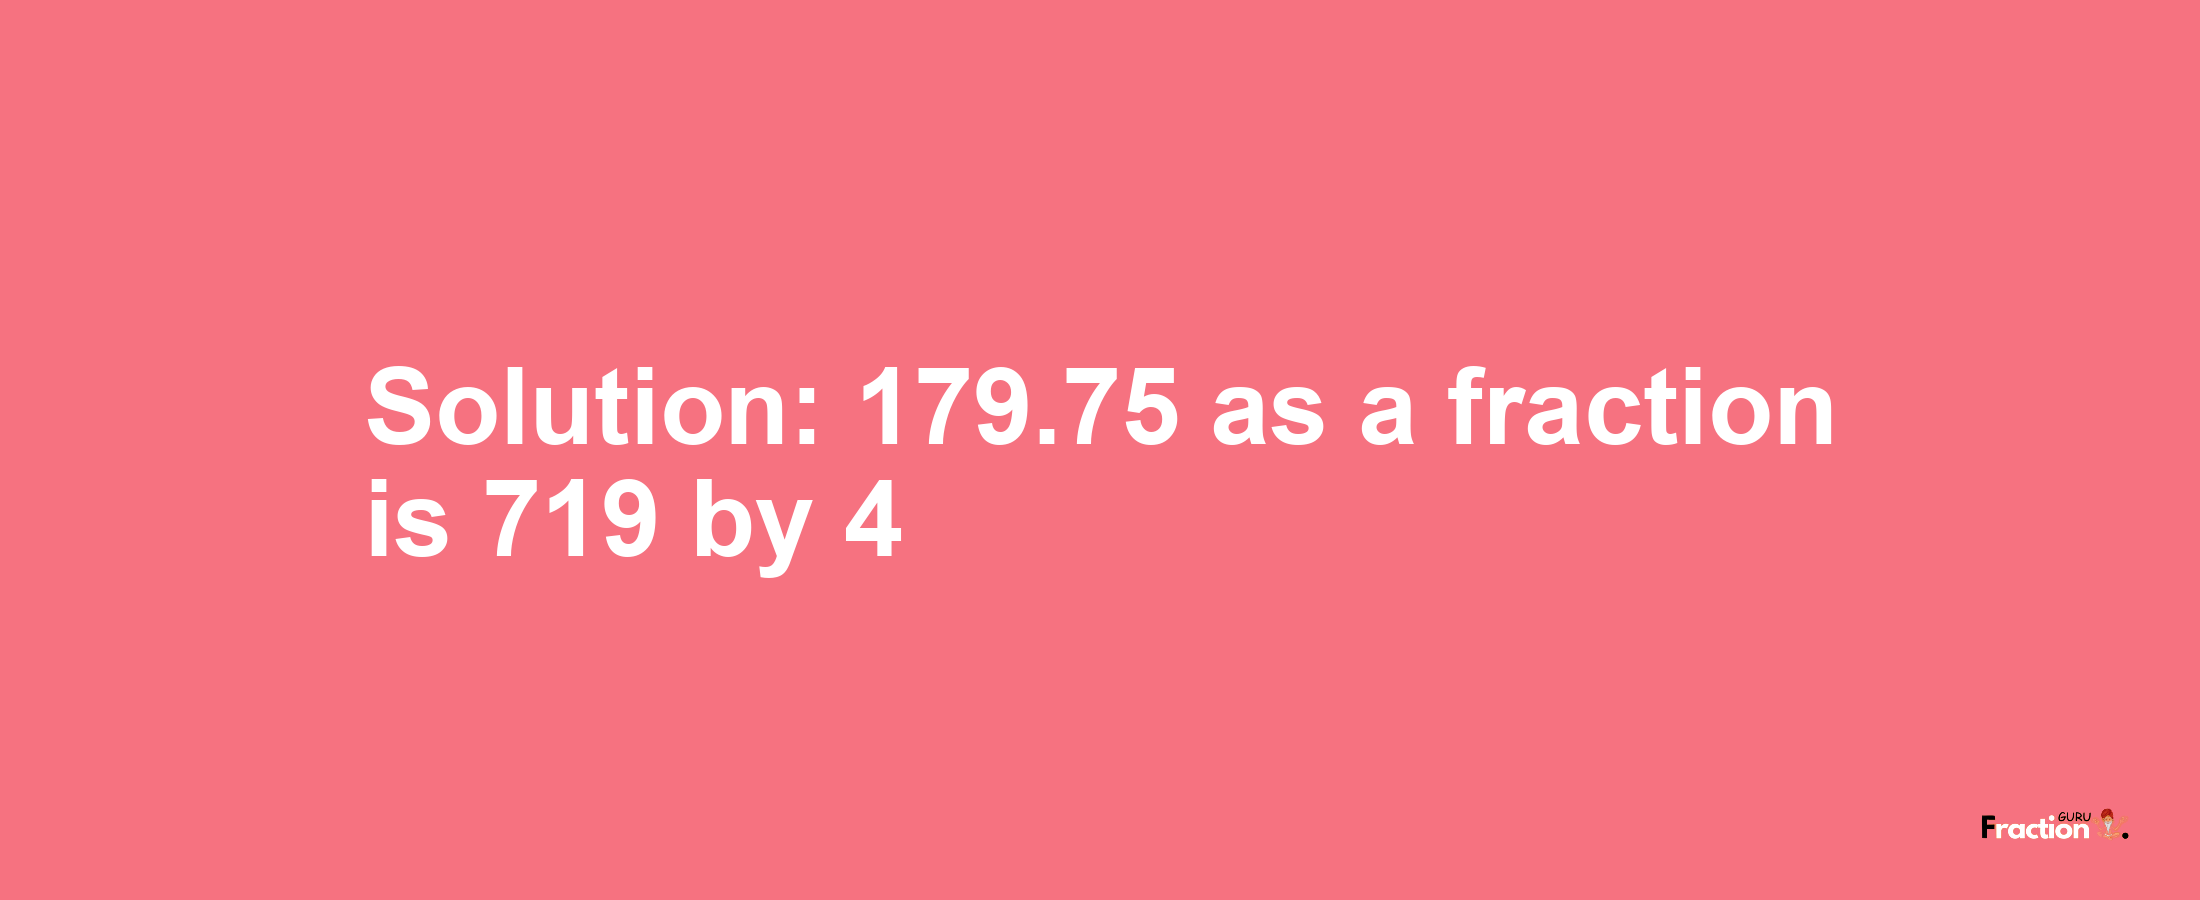 Solution:179.75 as a fraction is 719/4